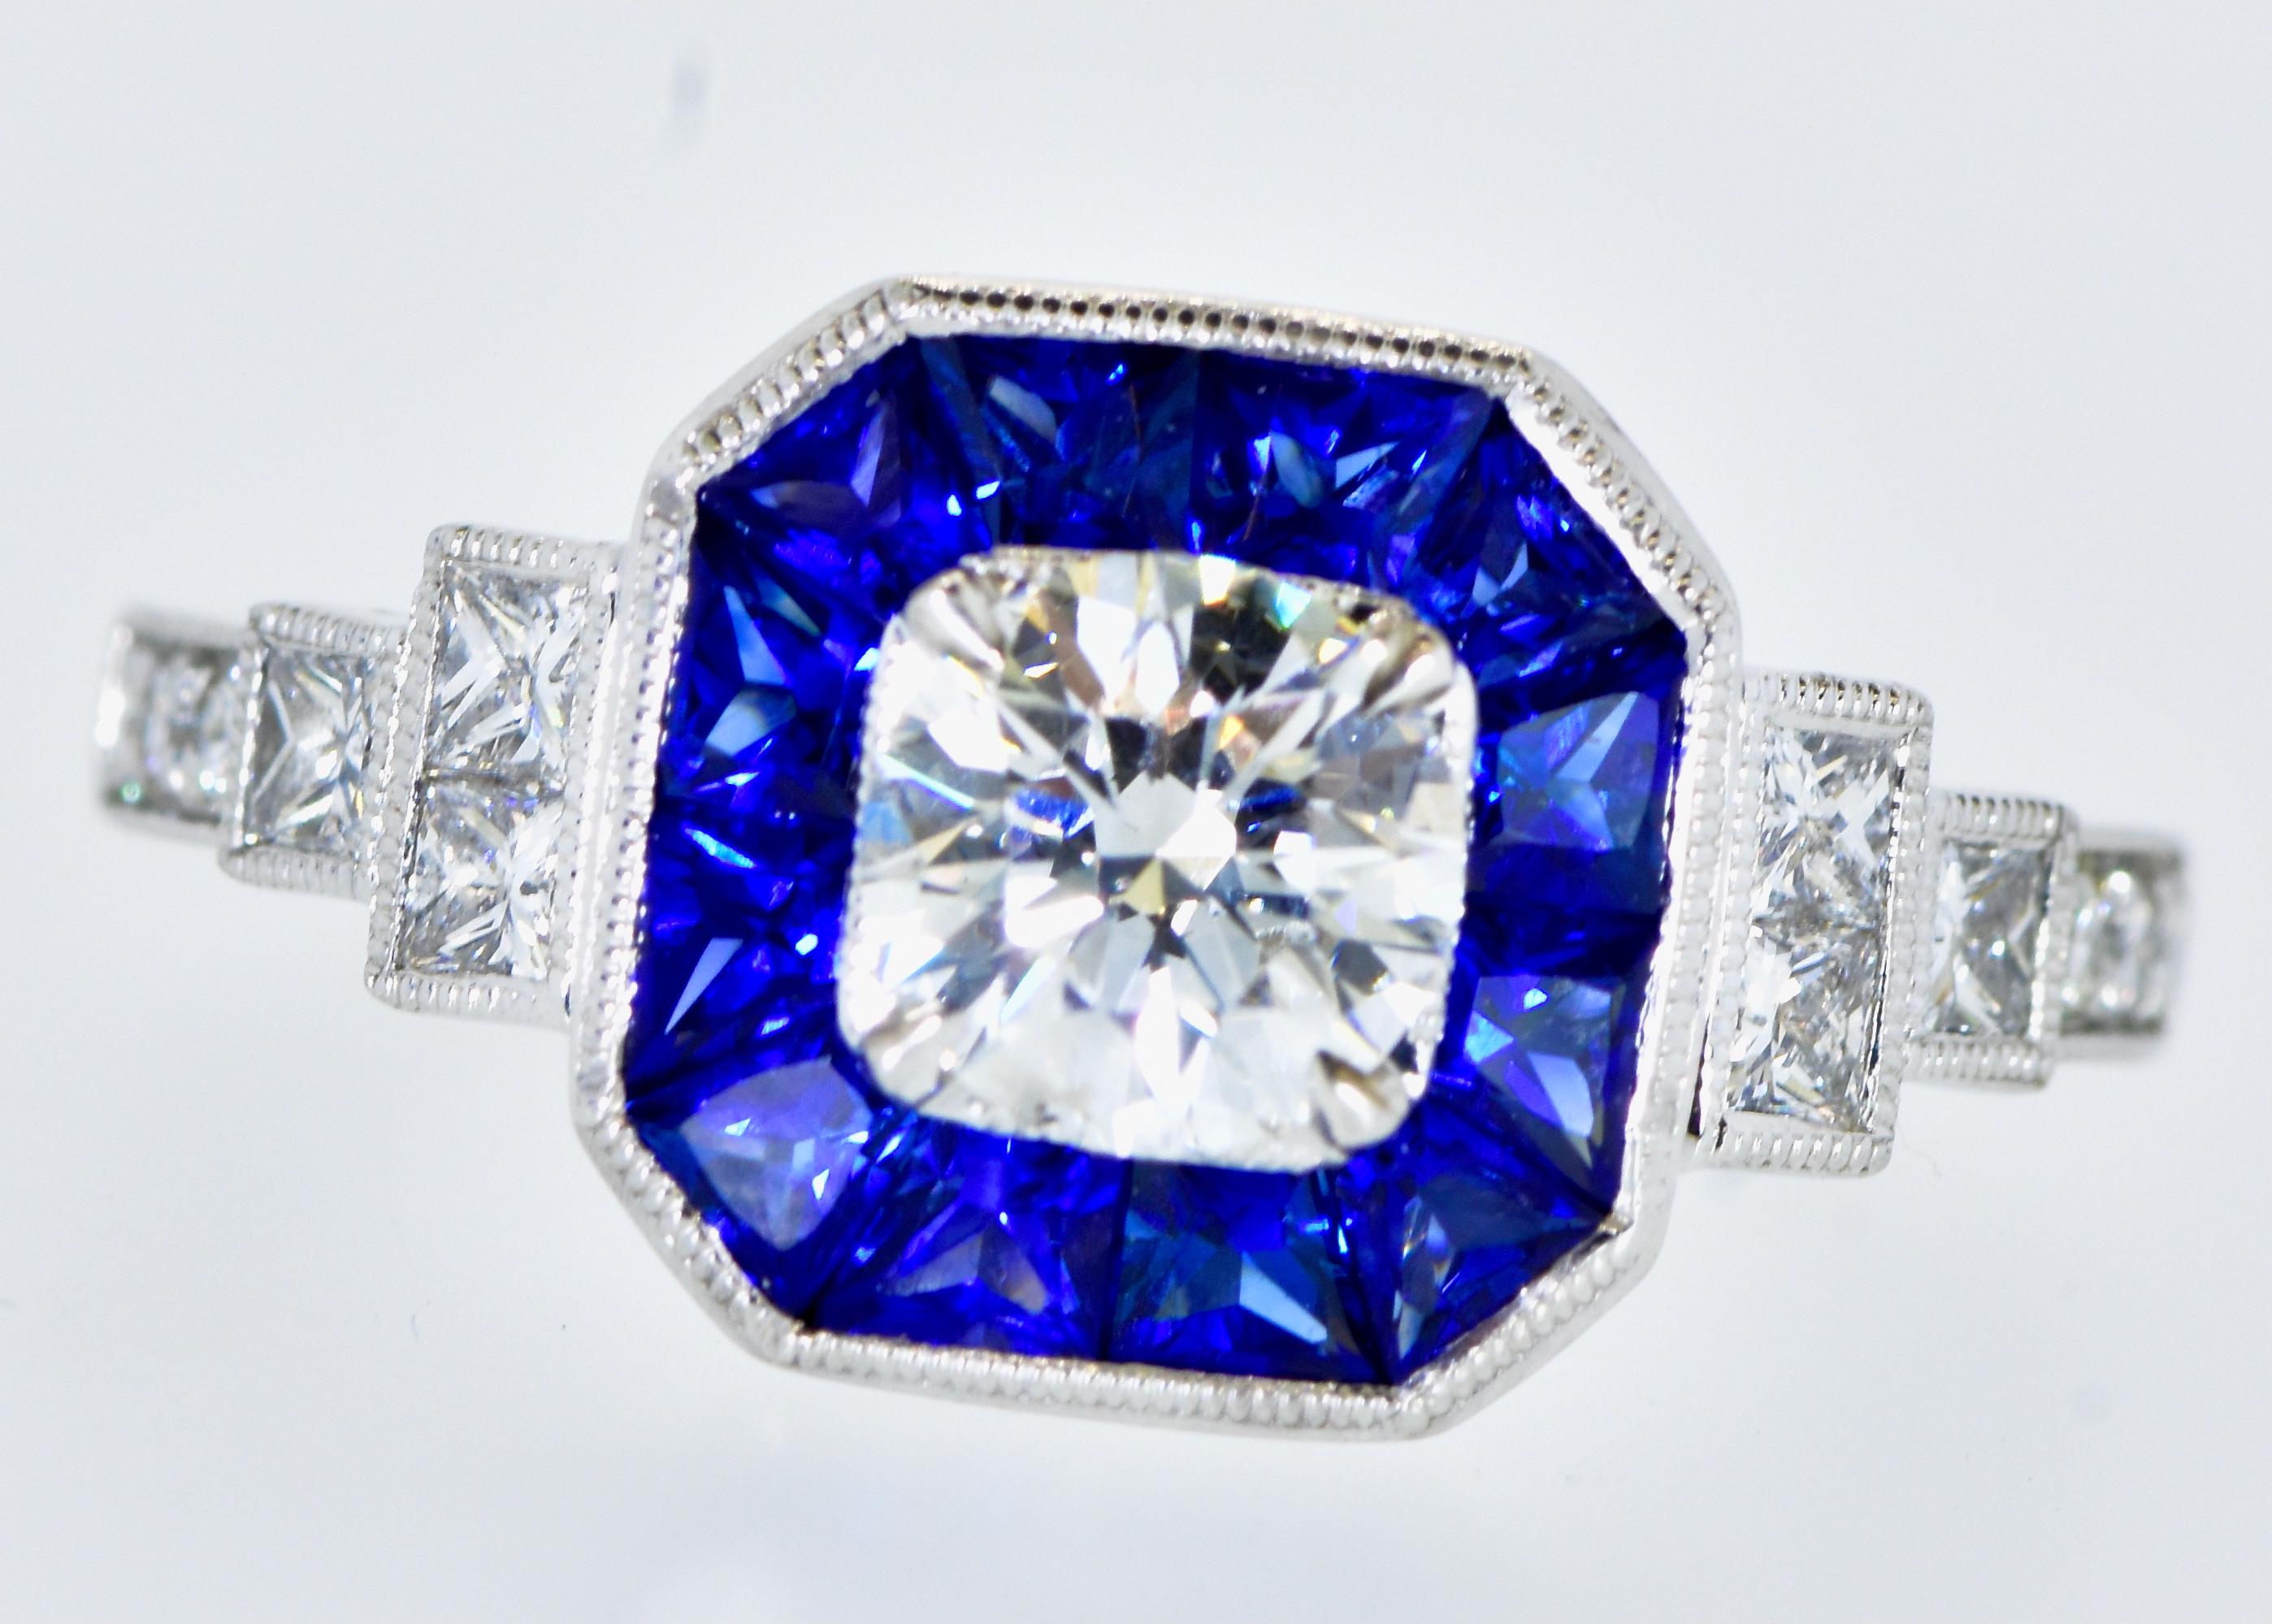 Sapphire and Diamond white gold contemporary new ring.  18K (marked 750), white gold well made ring possessing 12 fancy cut natural excellent color bright blue sapphires - not too light nor too dark - weighing an estimated 1.0 cts.  the 12 smaller